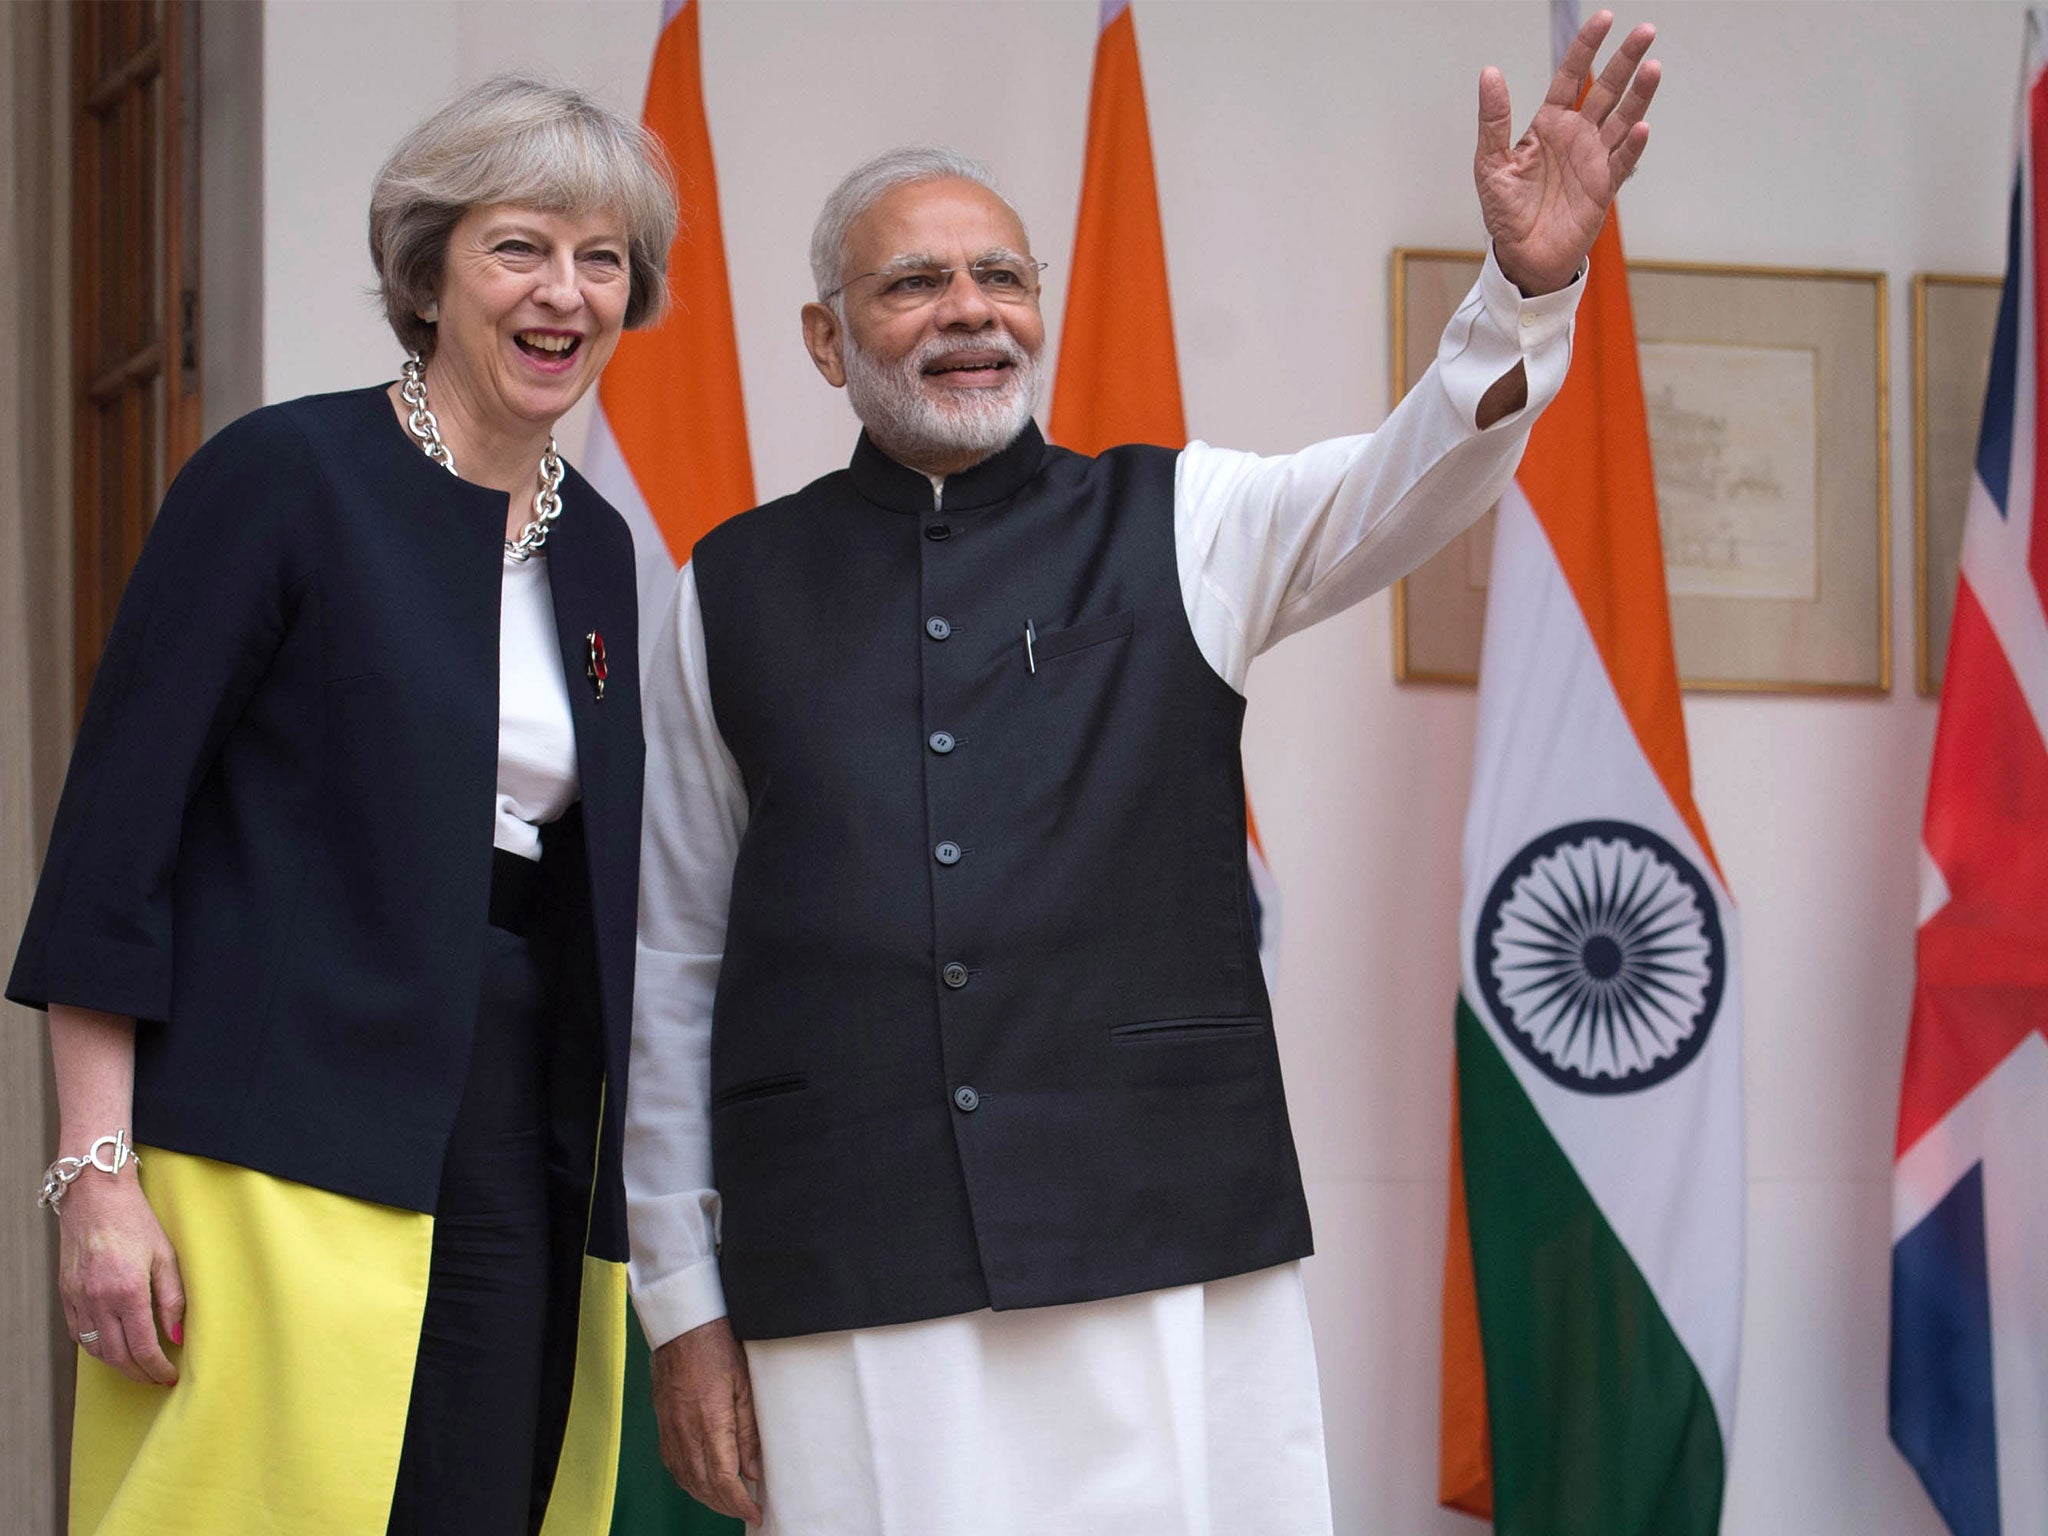 The Conservatives have been consolidating ties with India's Narendra Modi